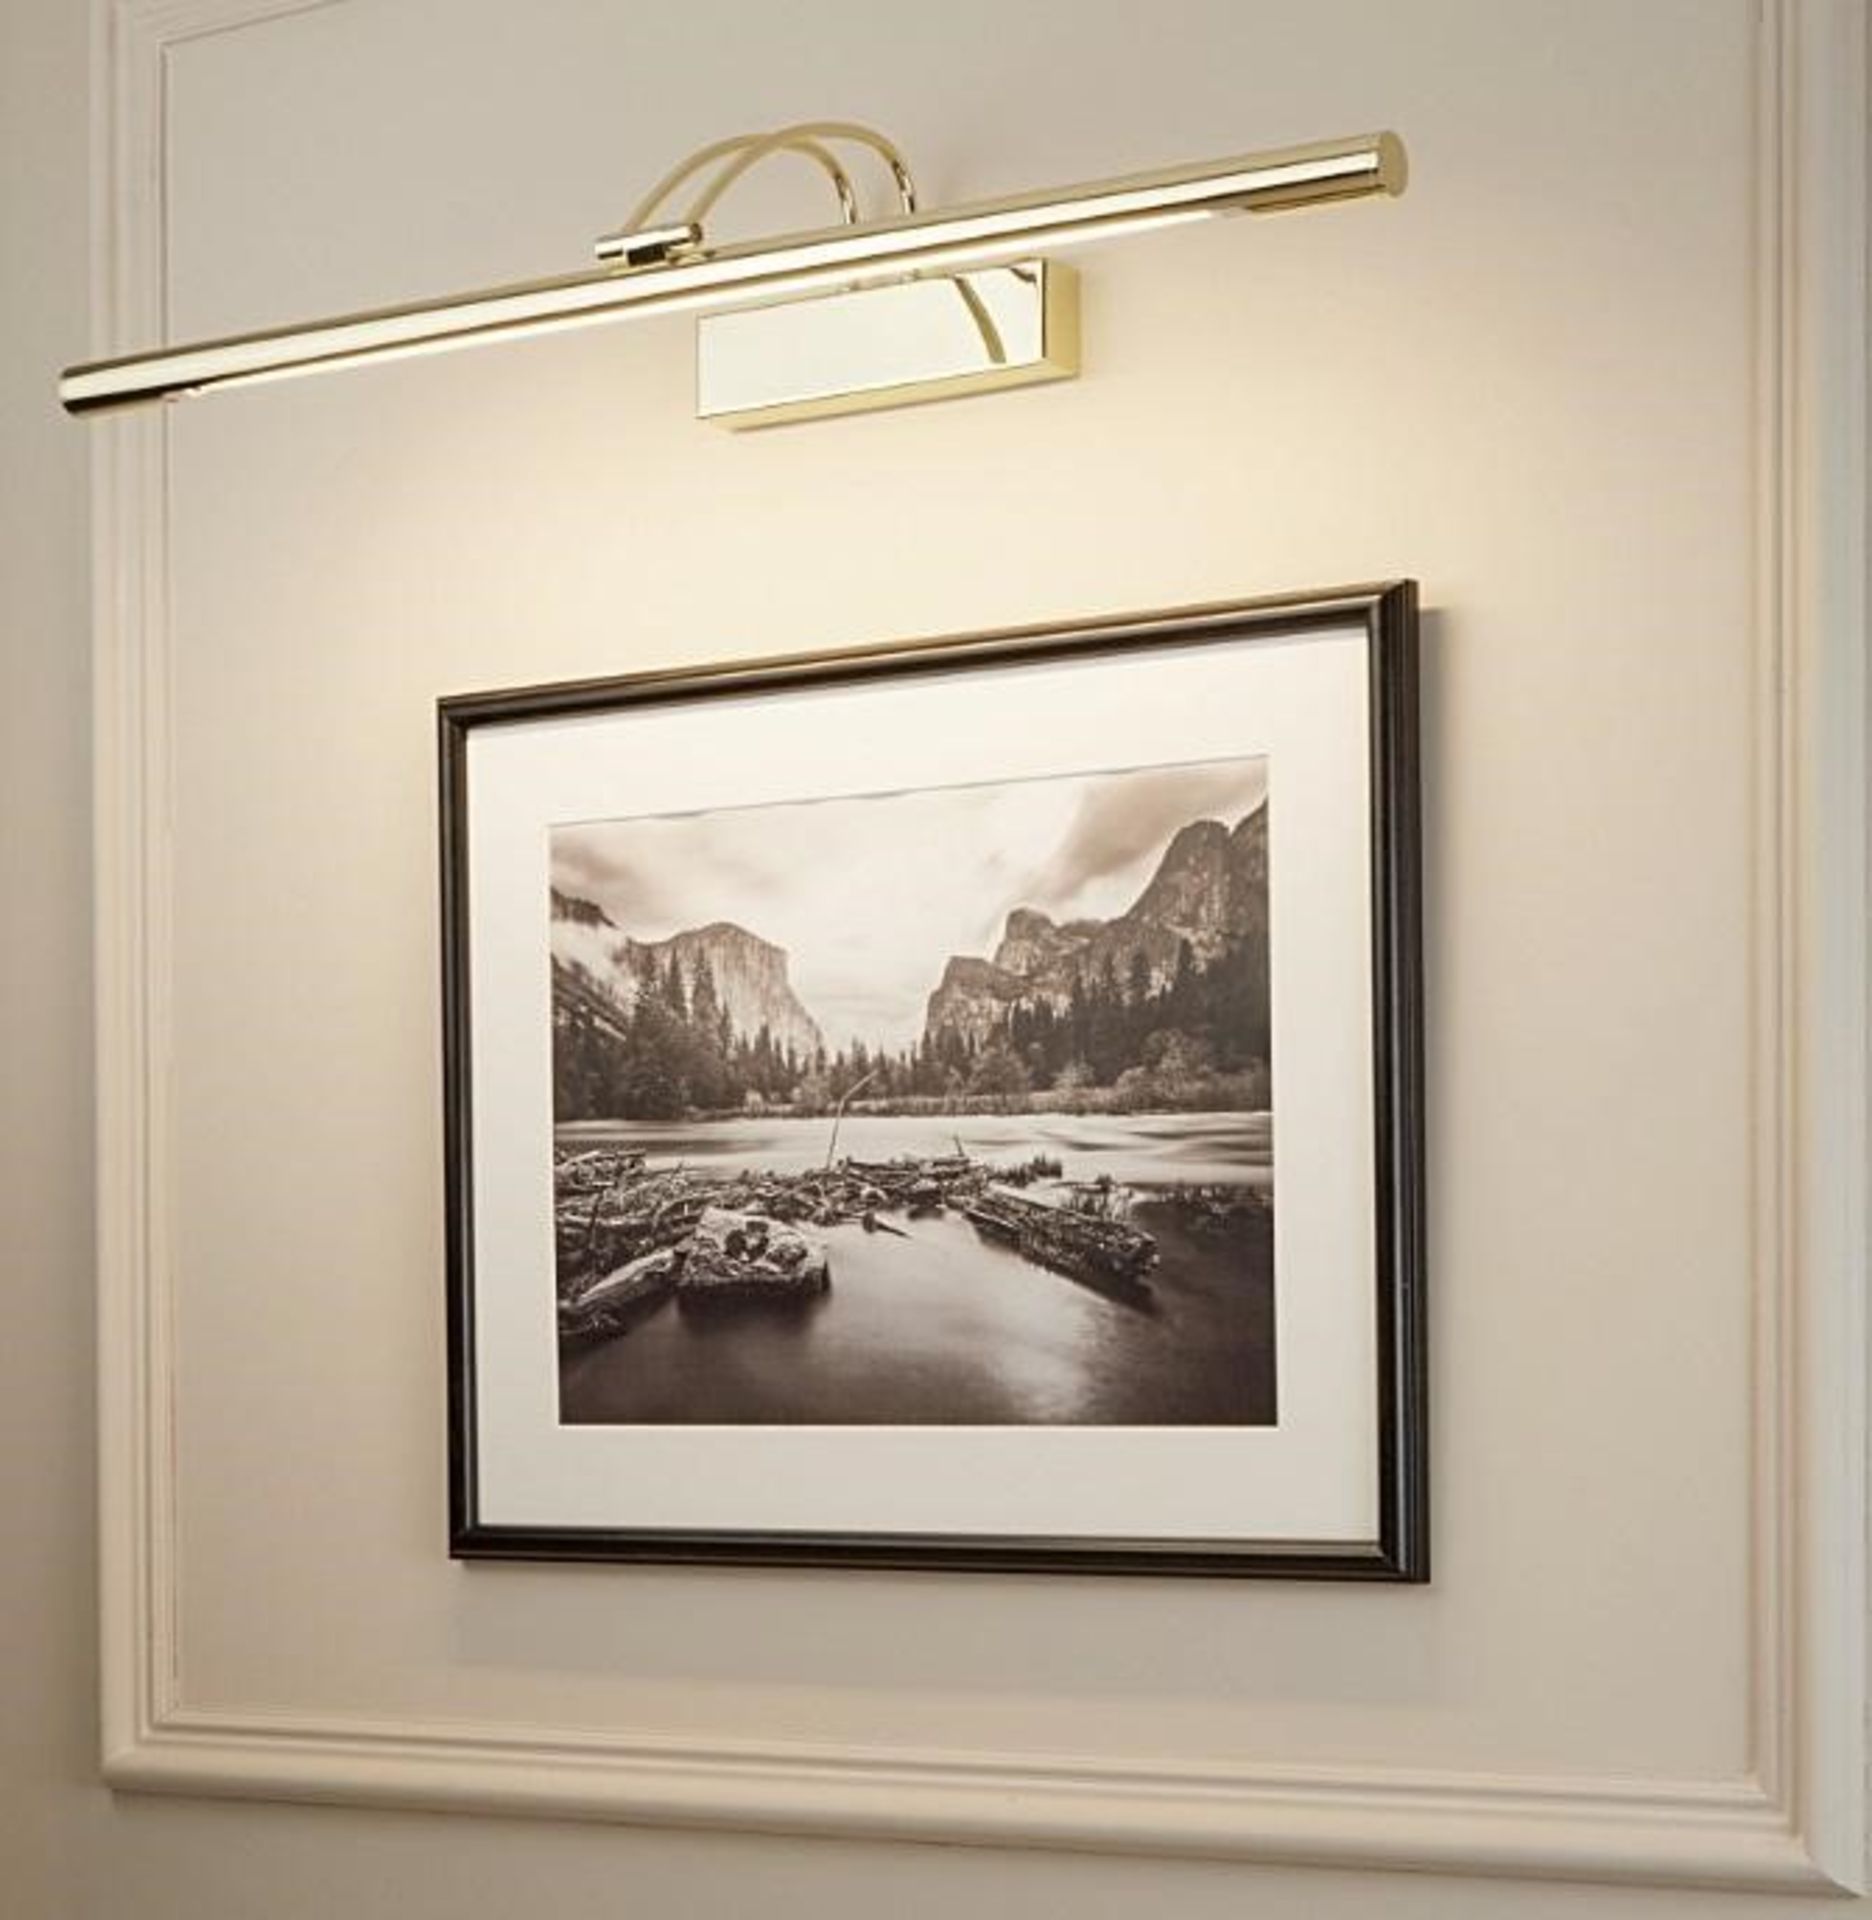 1 x Polished Brass Picture Light With Adjustable Head, Switched - Ex Display Stock - CL298 - Ref: J1